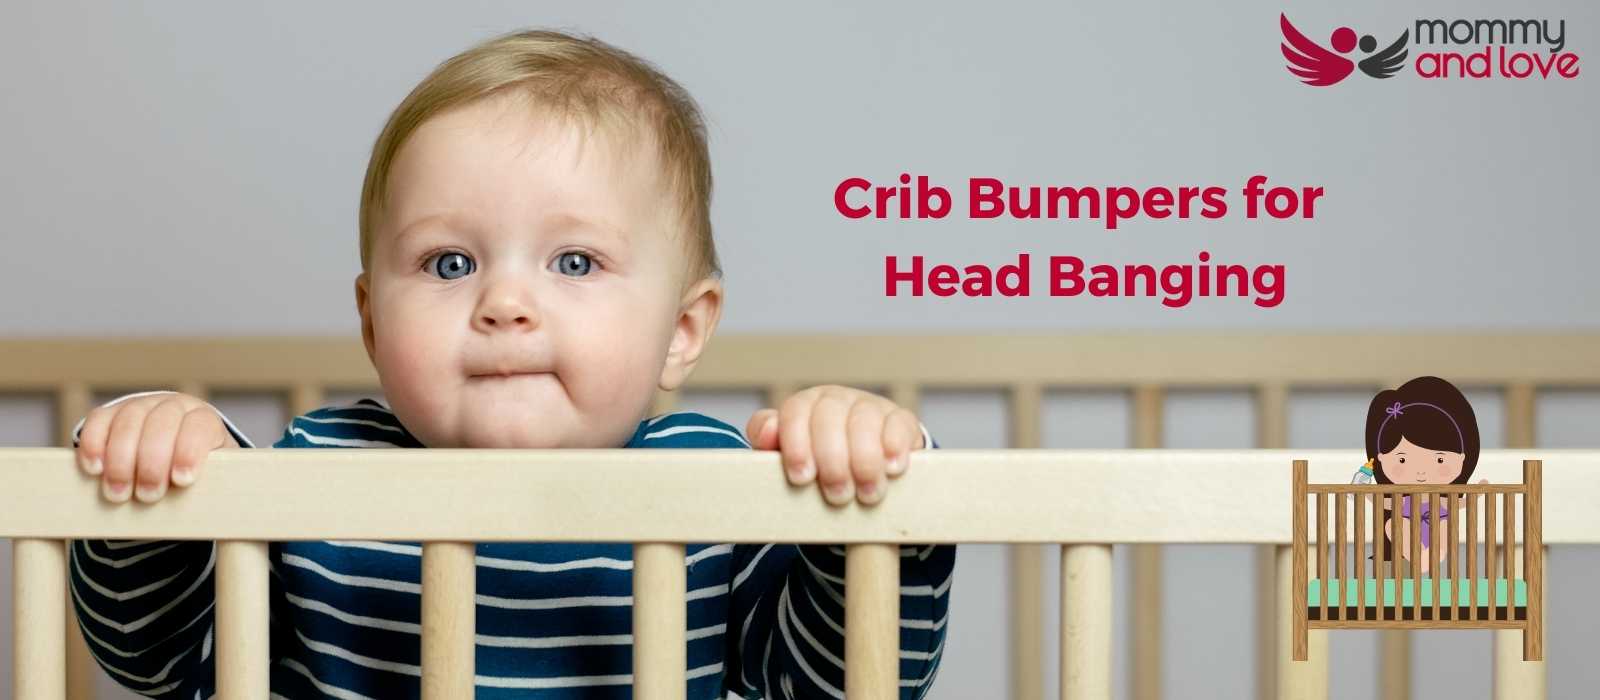 Crib Bumpers for Head Banging